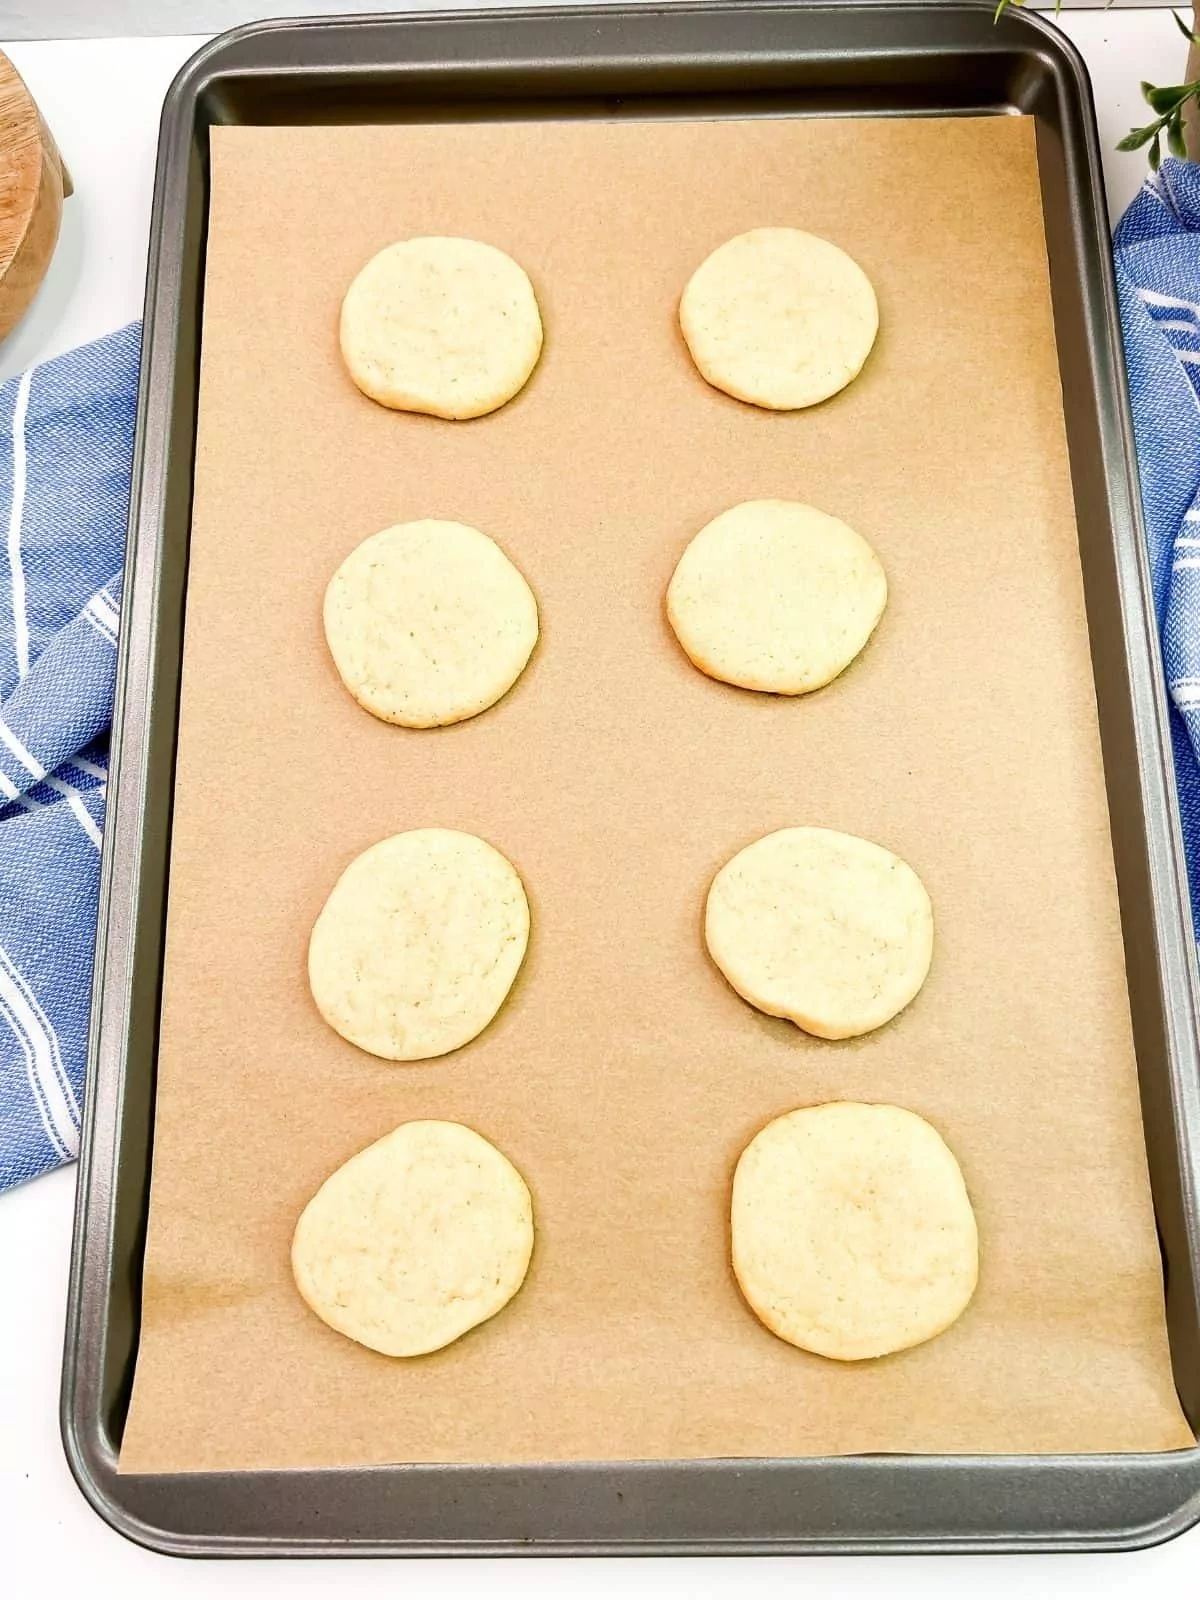 slice and bake cookies on baking tray ready for the oven.